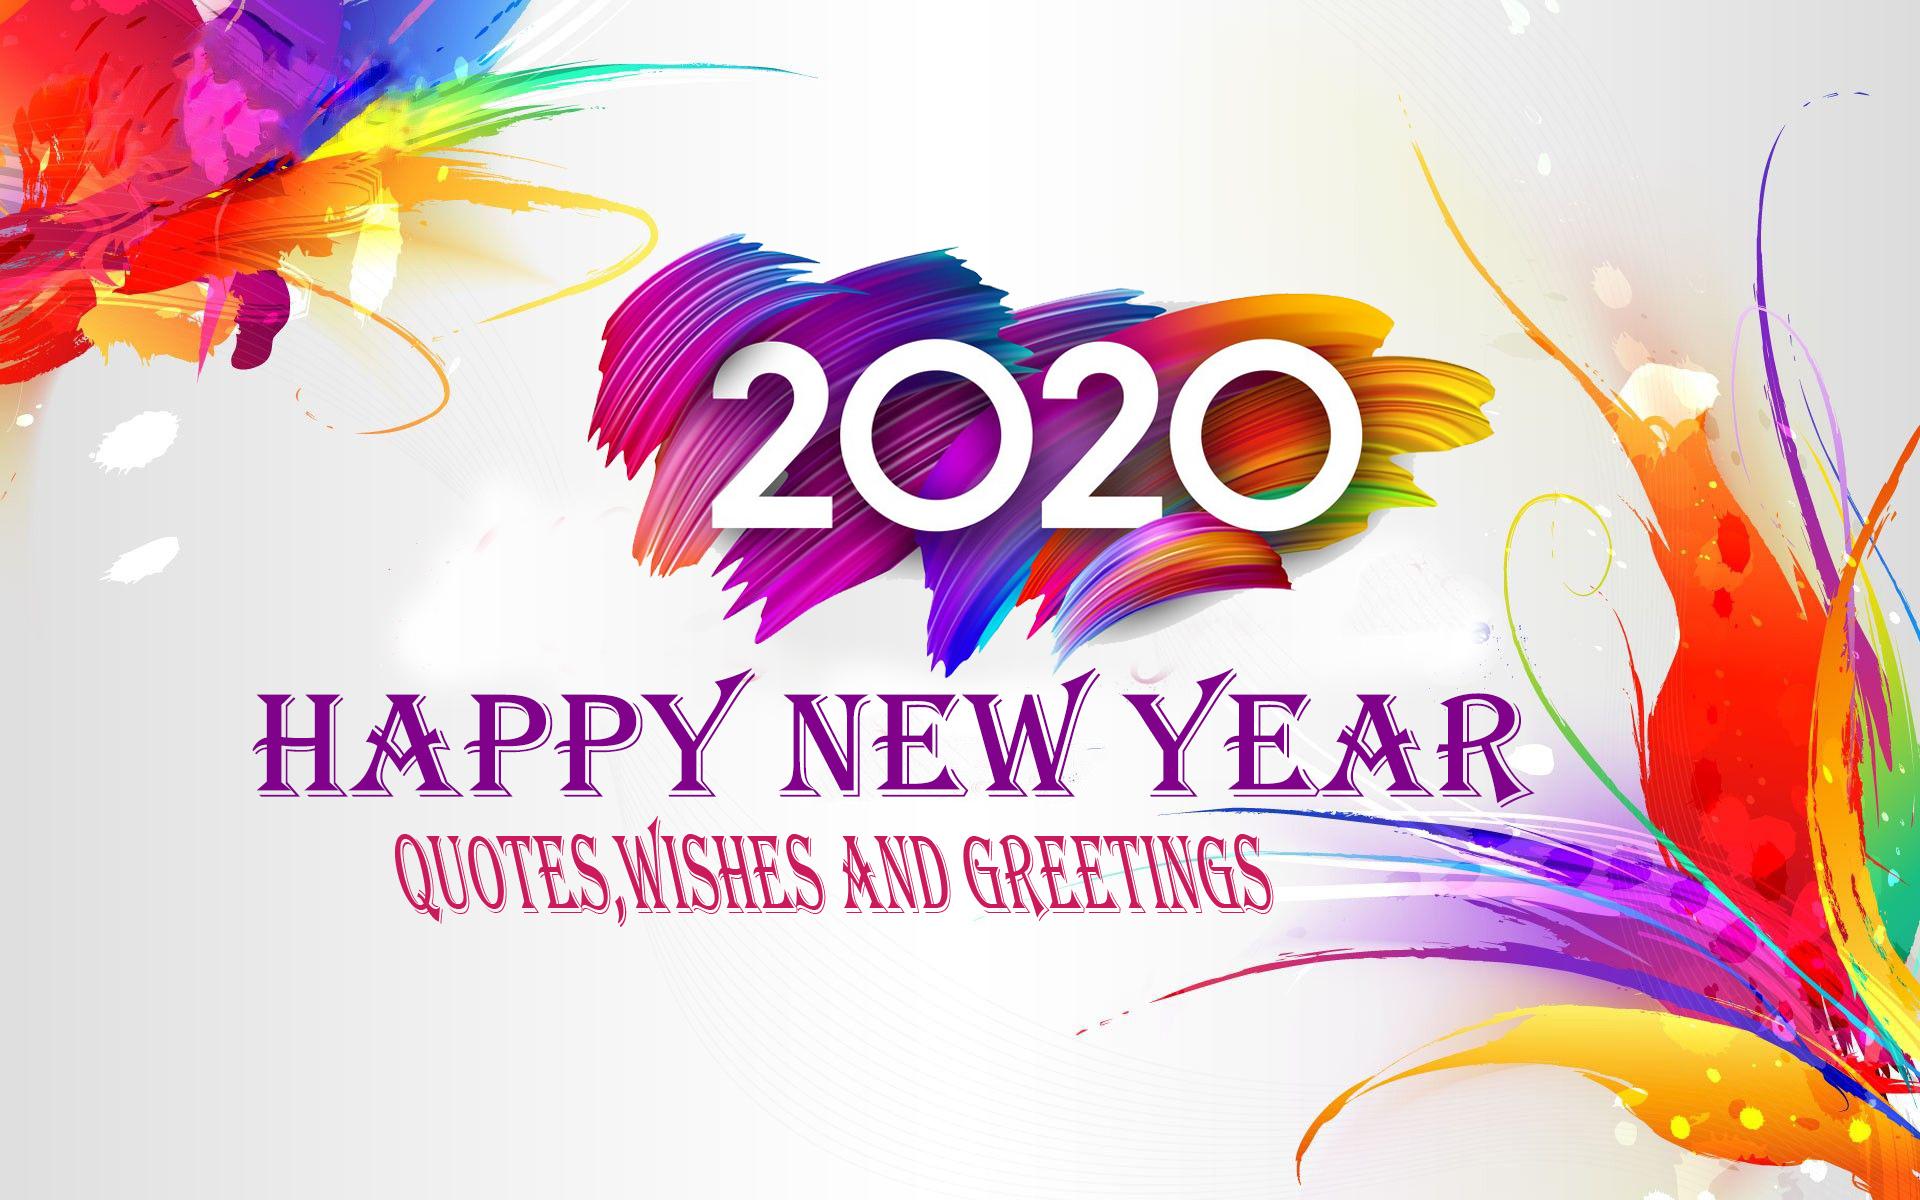 Happy New Year 2020: New Year Quotes, Image, Wishes & Greetings